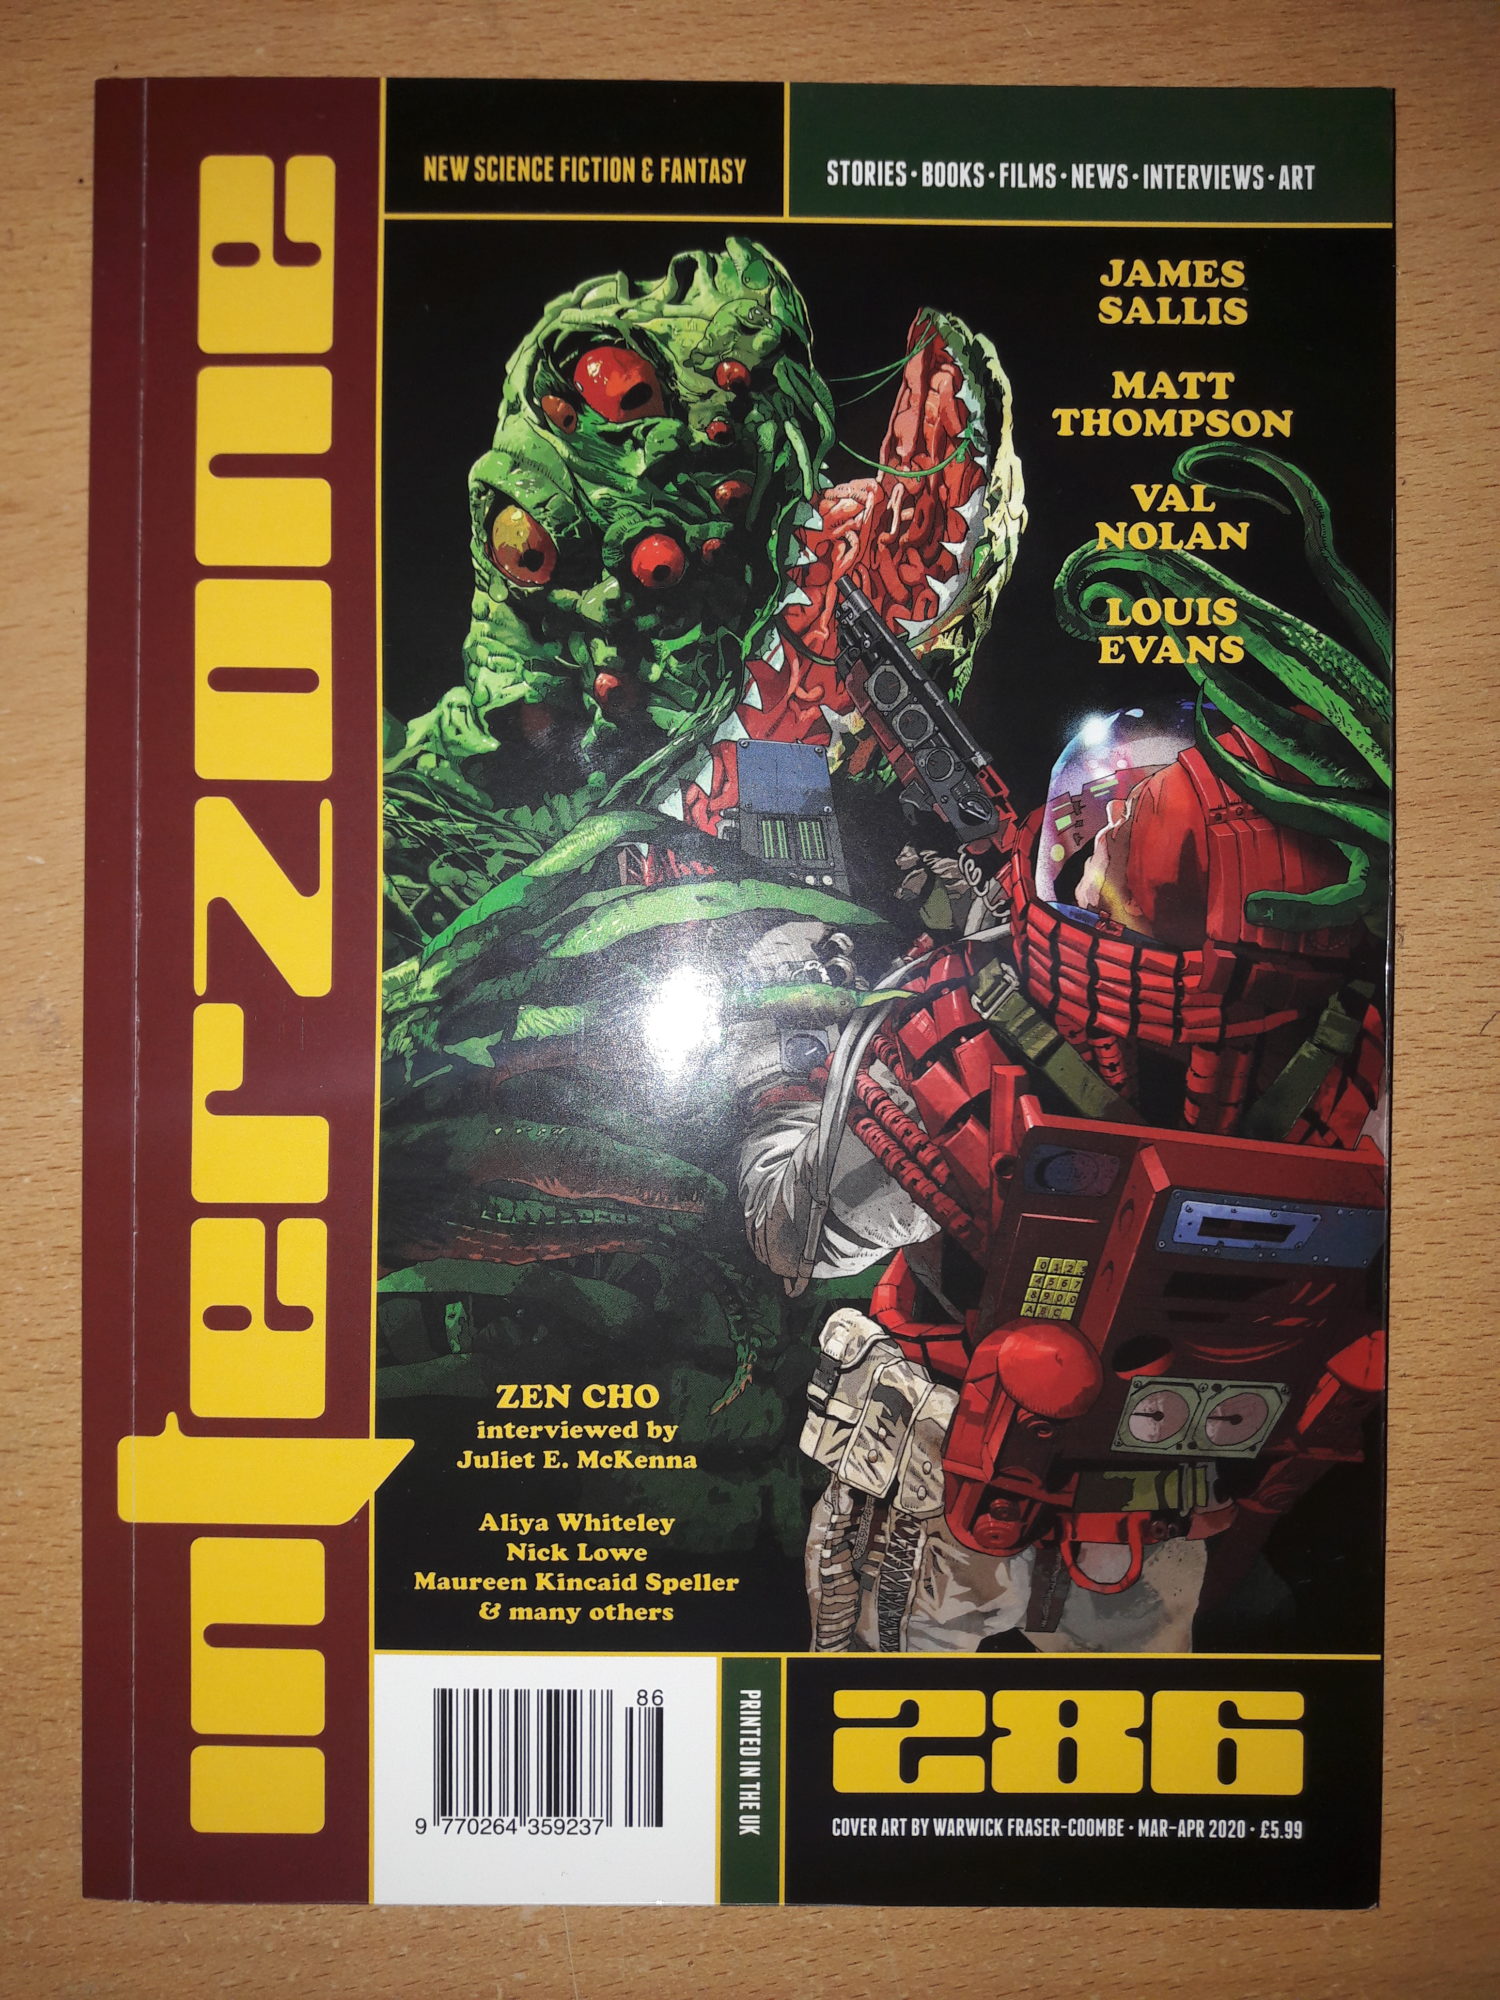 Interzone issue # 286 Review cover